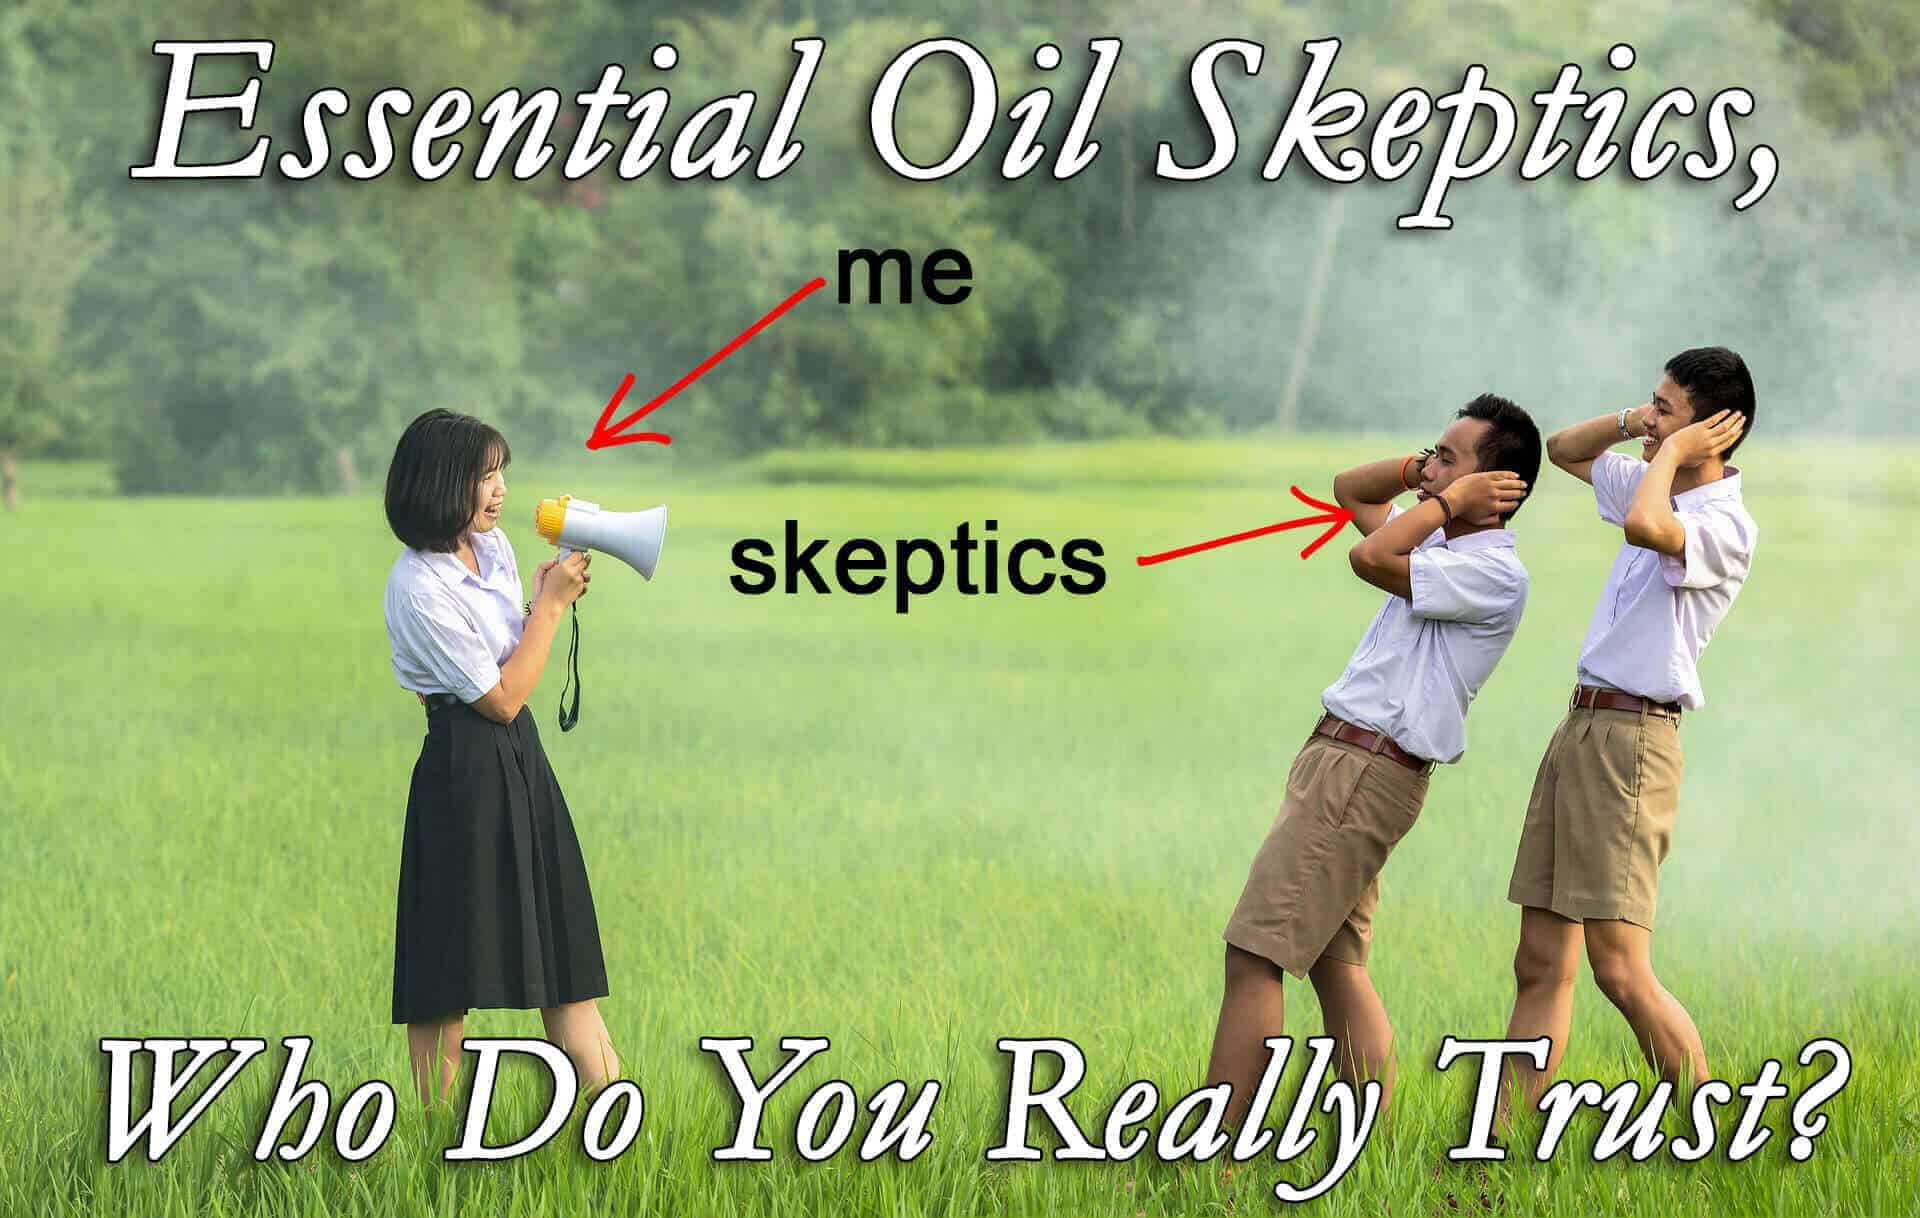 Essential Oil Skeptics, Who Do You Really Trust?